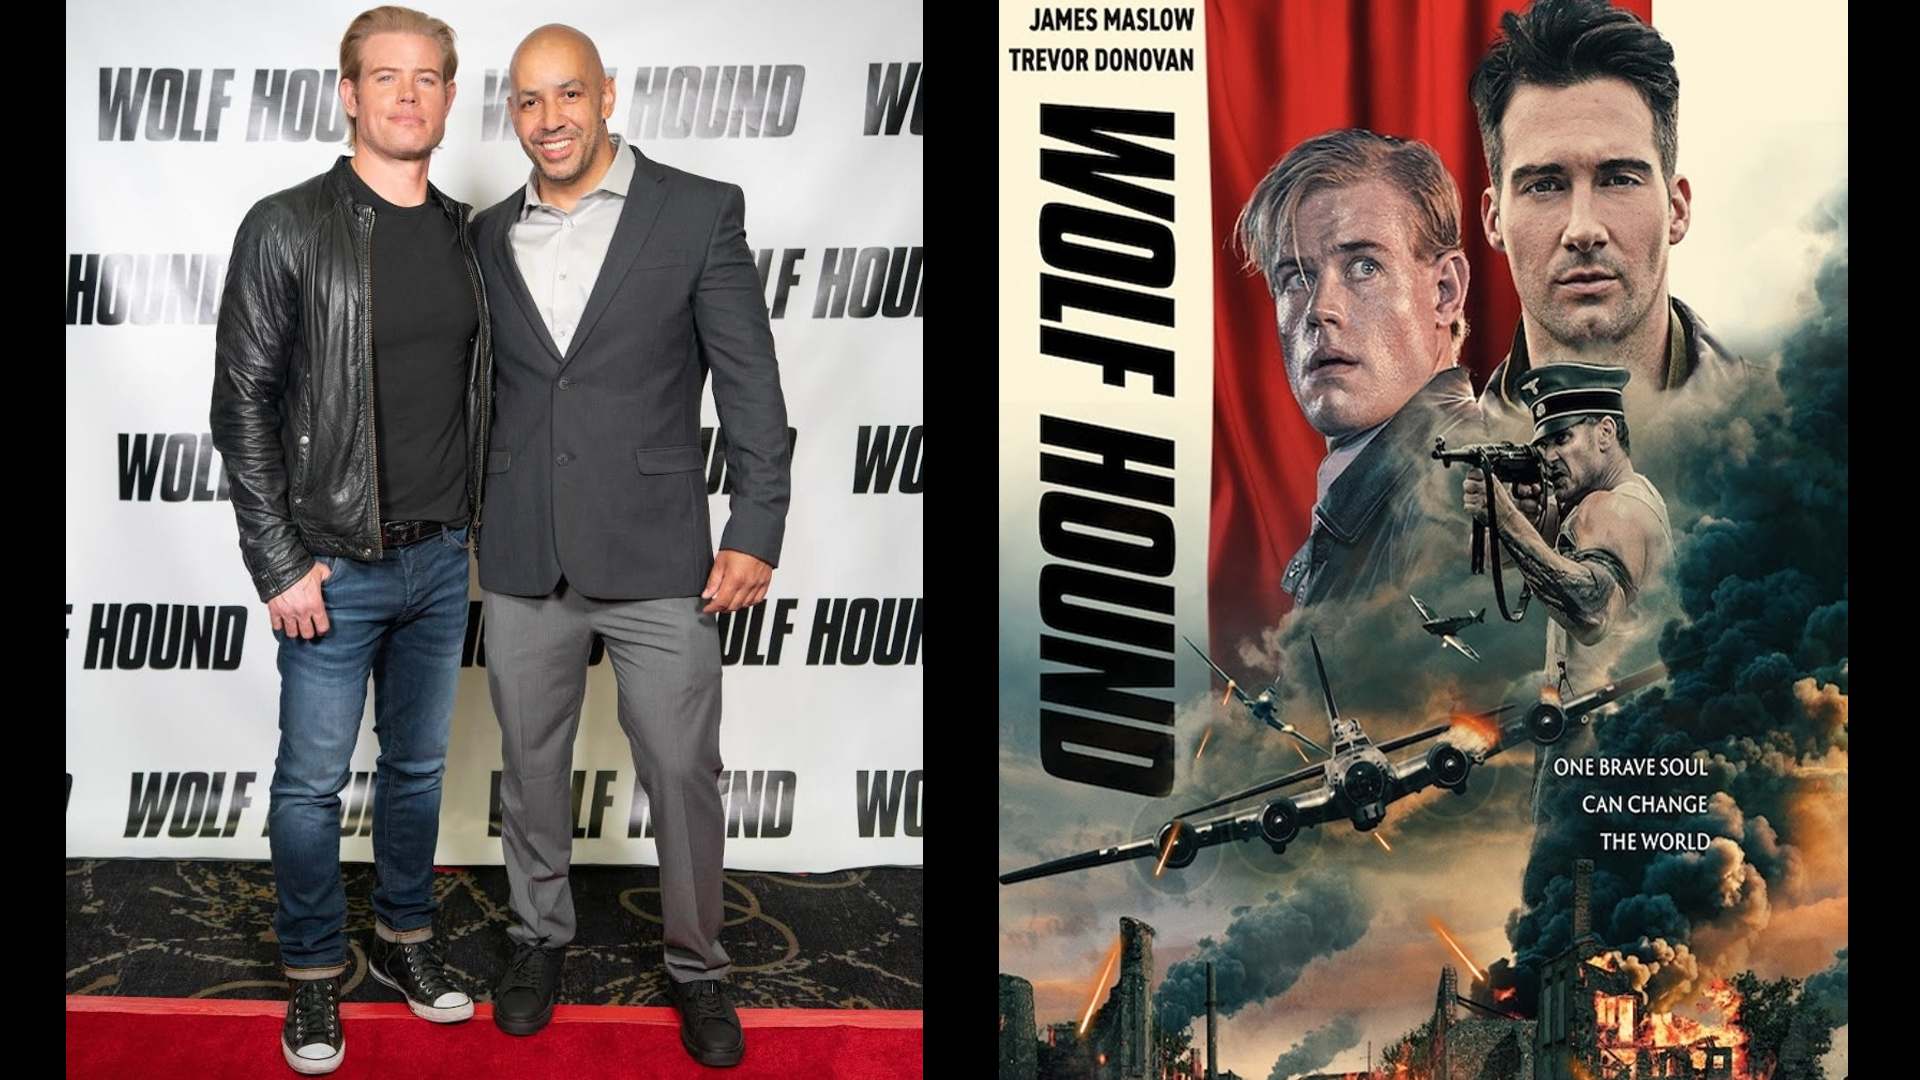 Hollywood Movie News: Actor Brian Heintz Talks Starring in ‘Wolf Hound’ – Lionsgate Movie is Out in Theaters Nationwide!